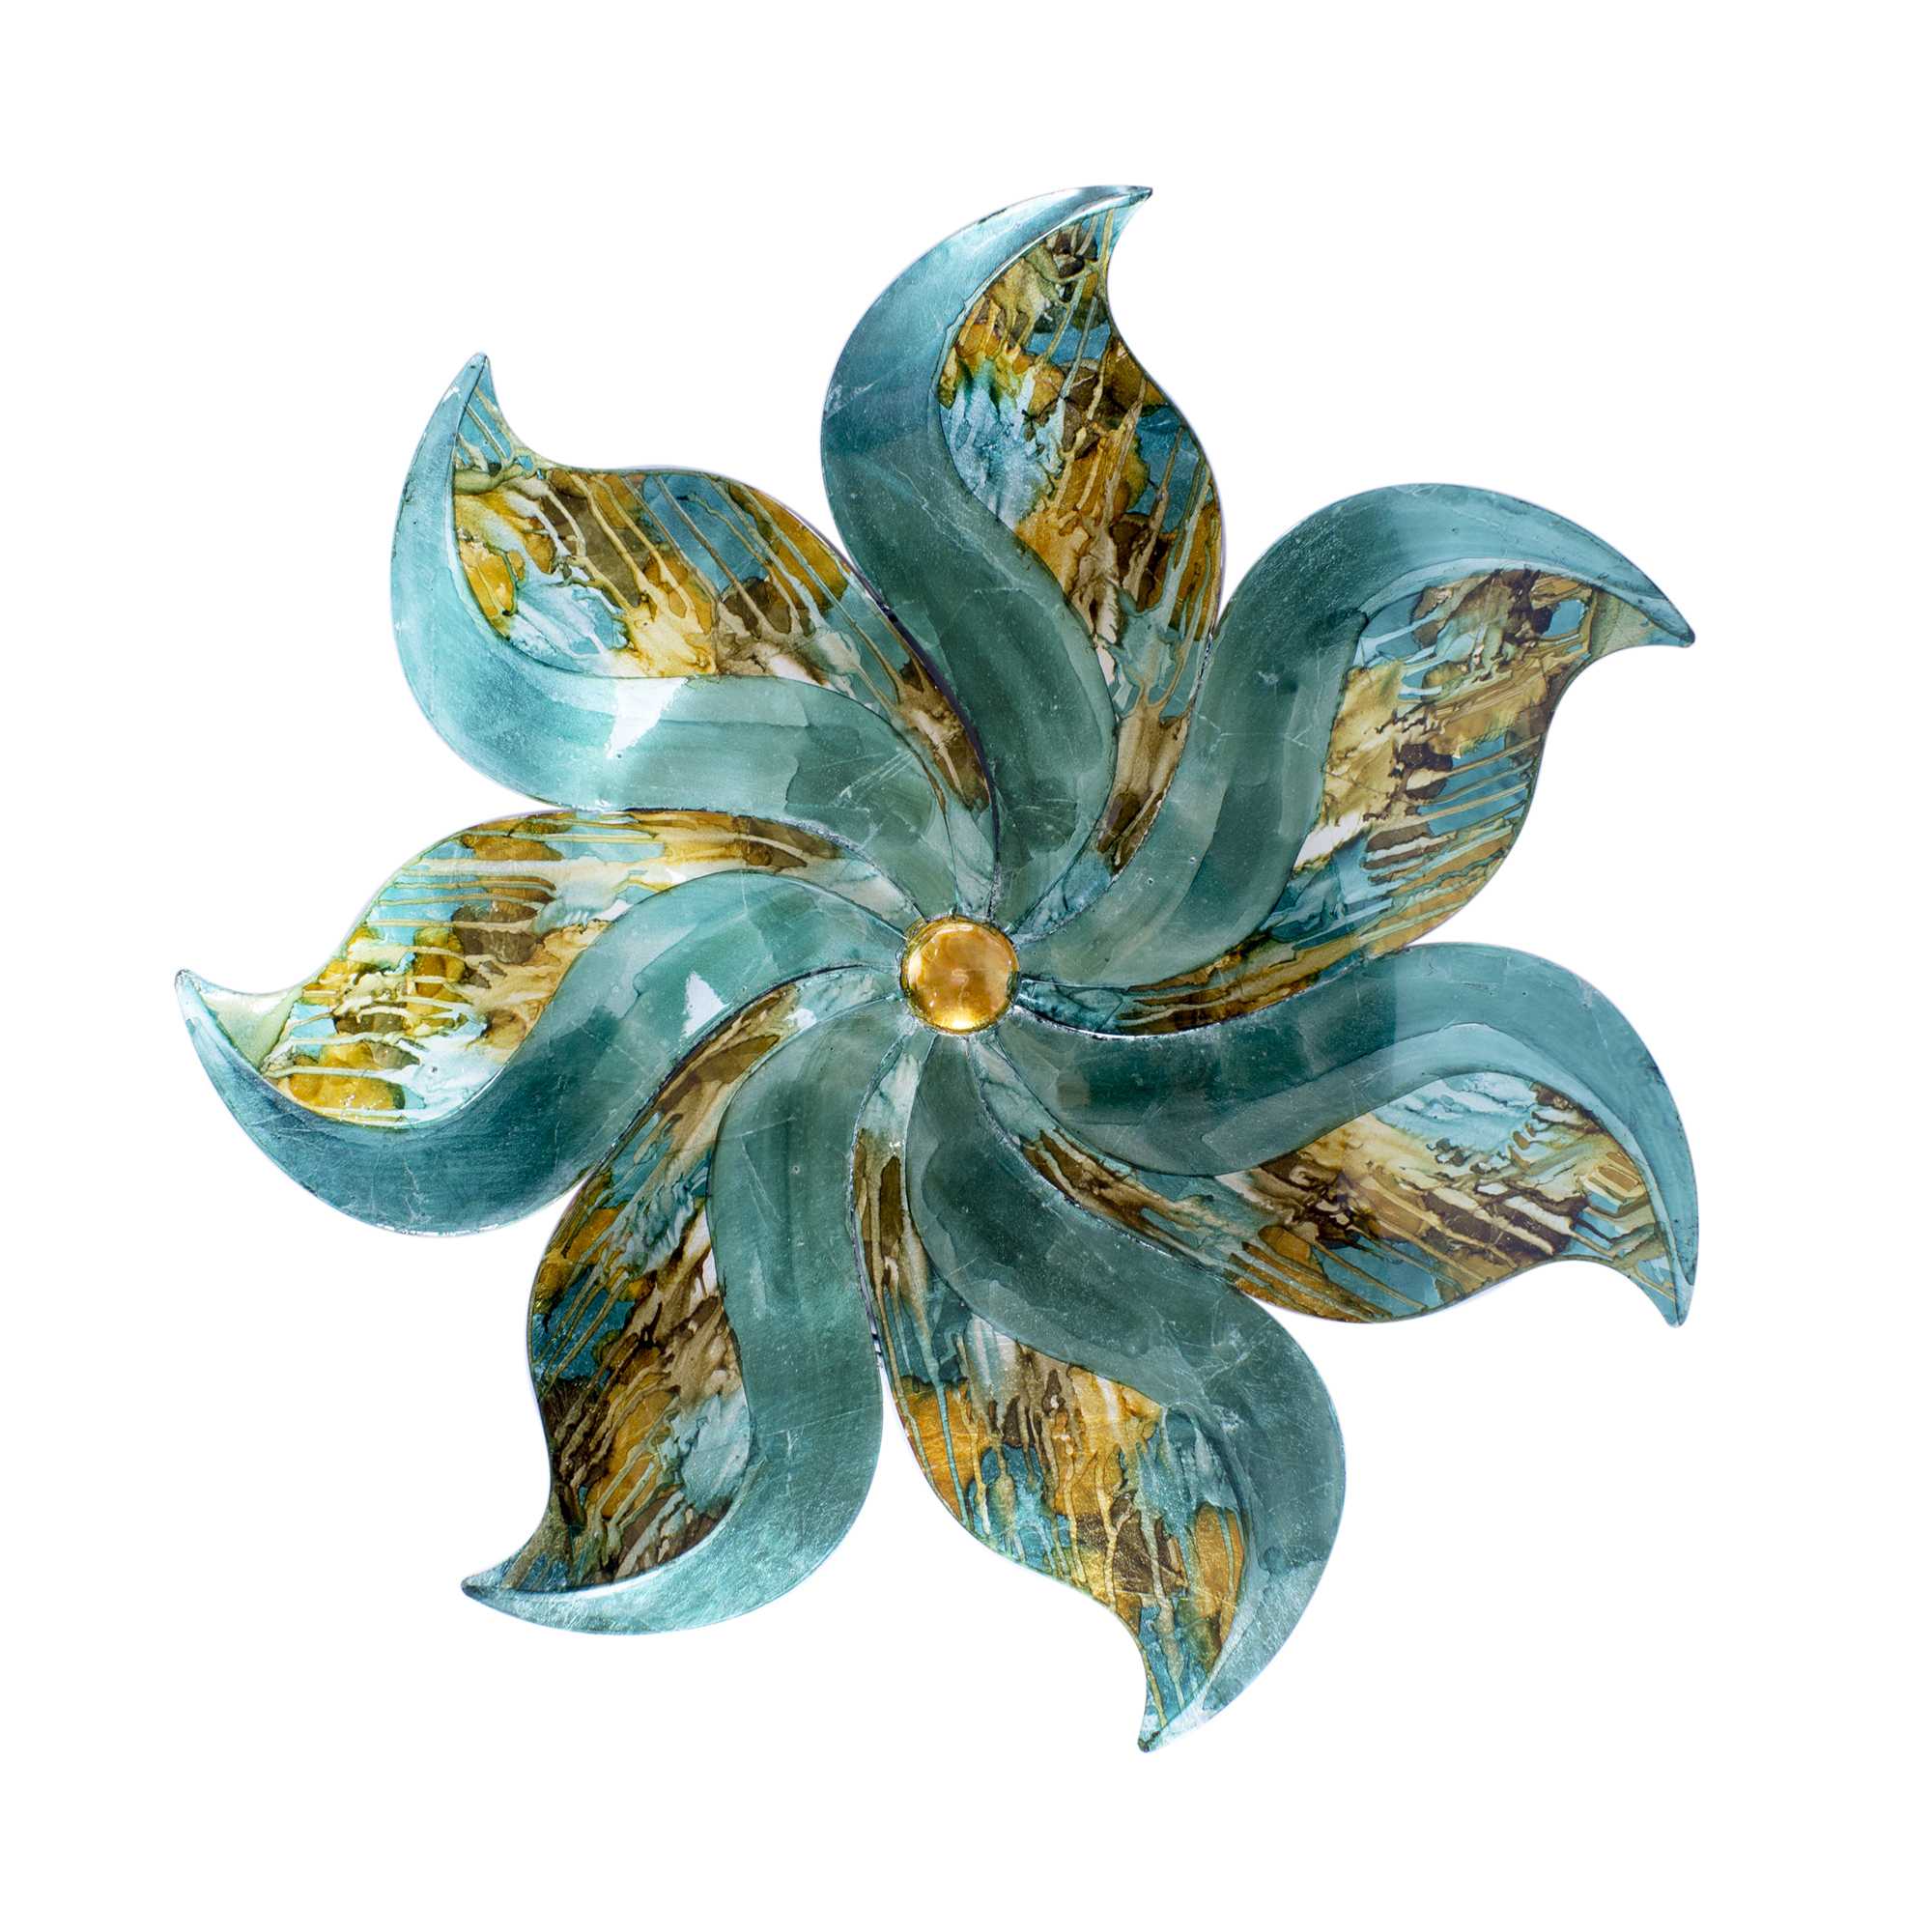 17.25" X 2" X 17.25" Turquoise Copper and Bronze Metal Small Flower Metal Wall Decor